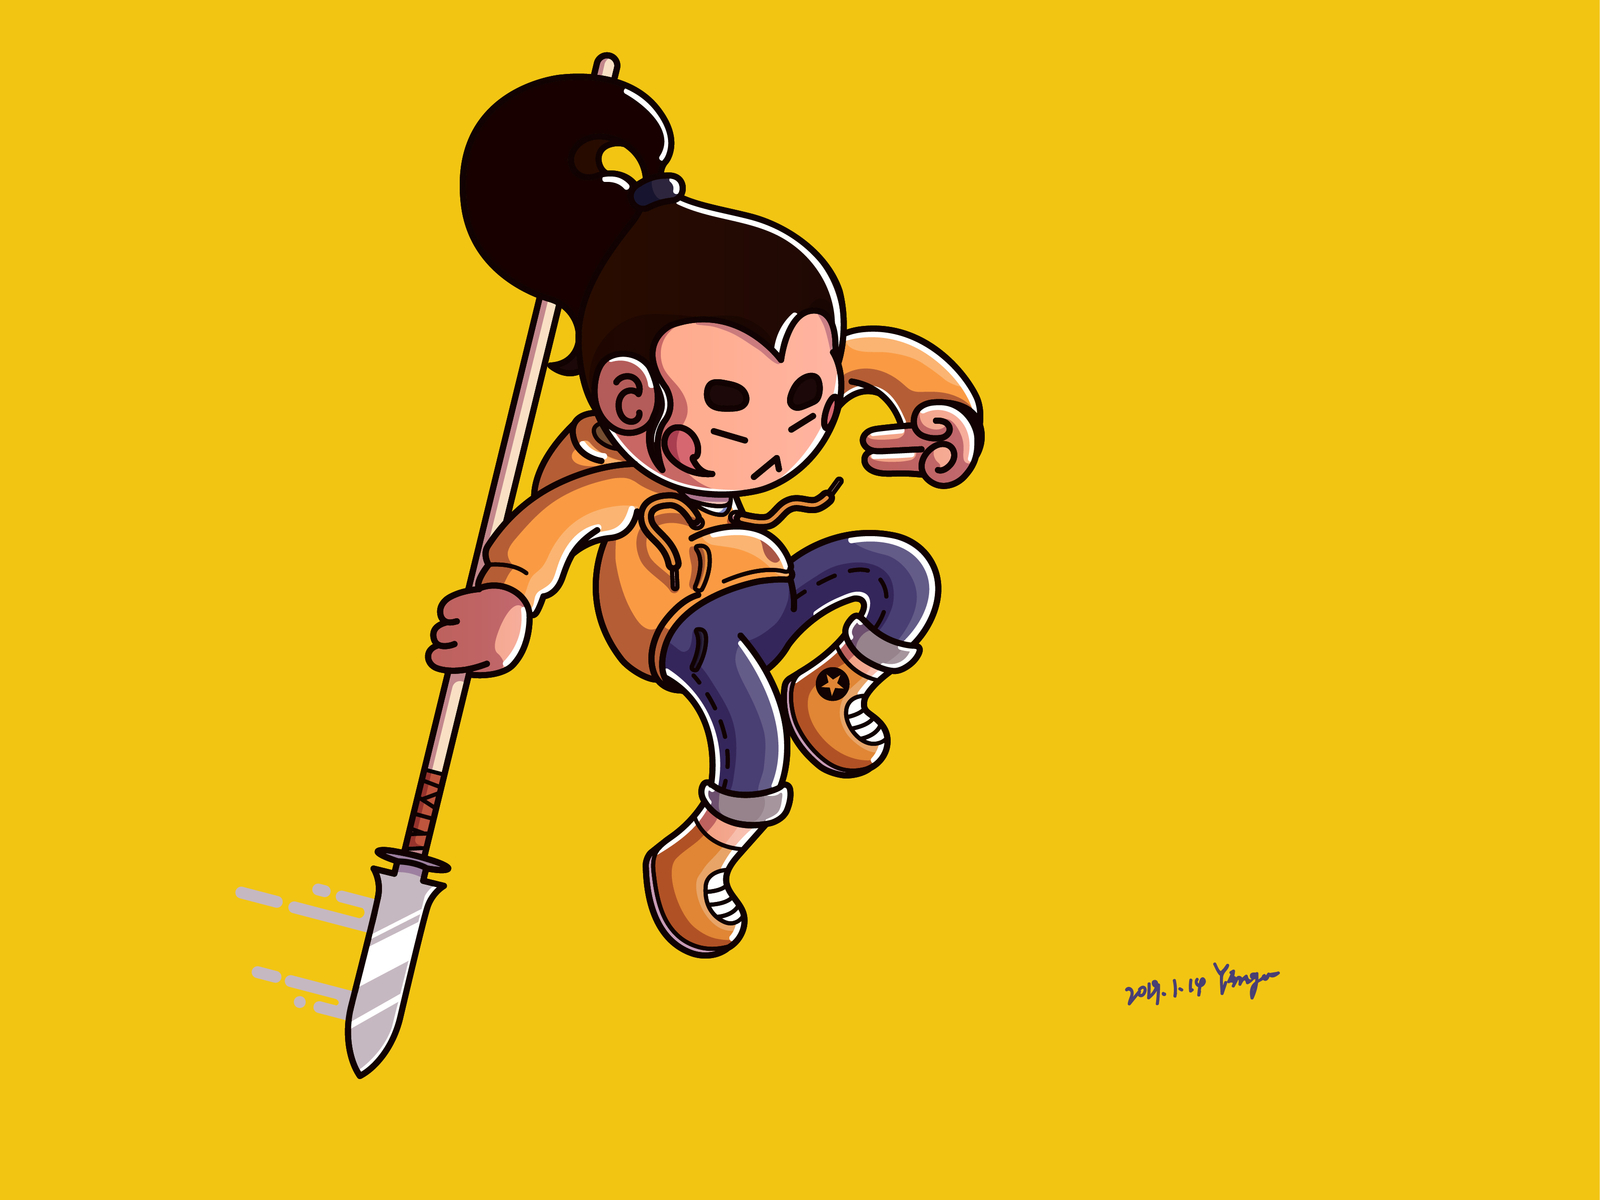 Xin Zhao by Ying on Dribbble